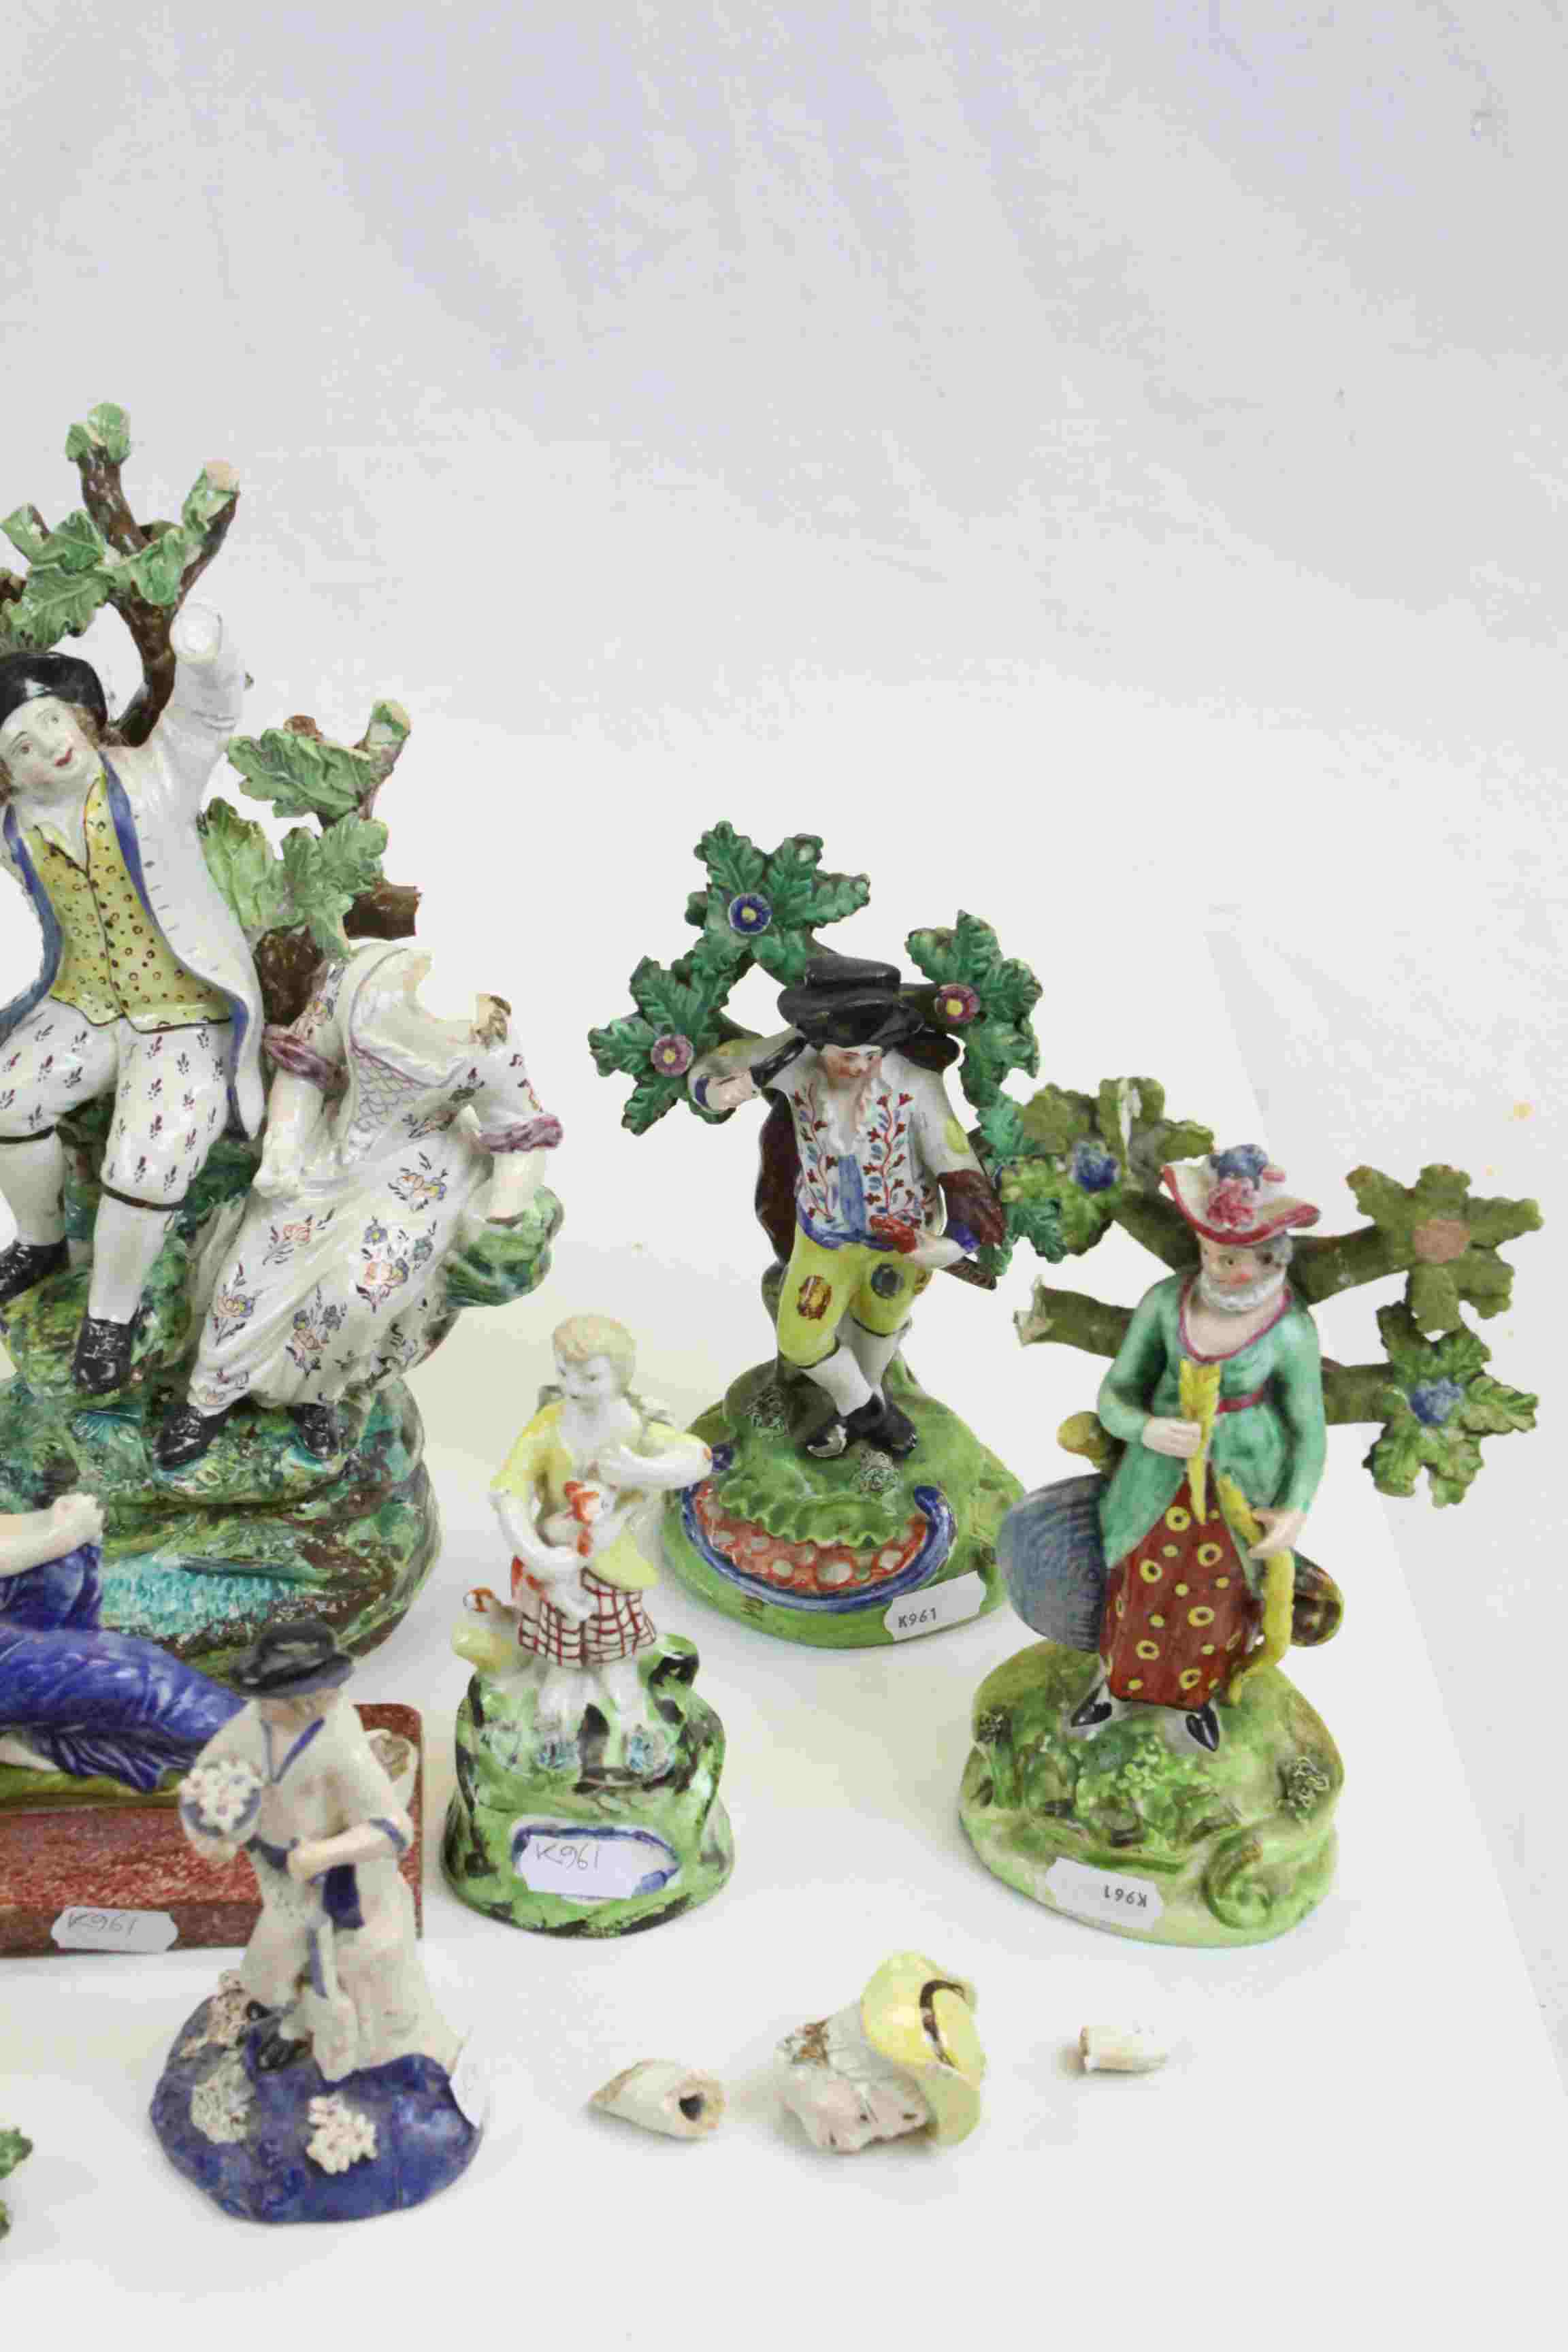 Group of Ten 19th century Staffordshire Figures - Image 4 of 9